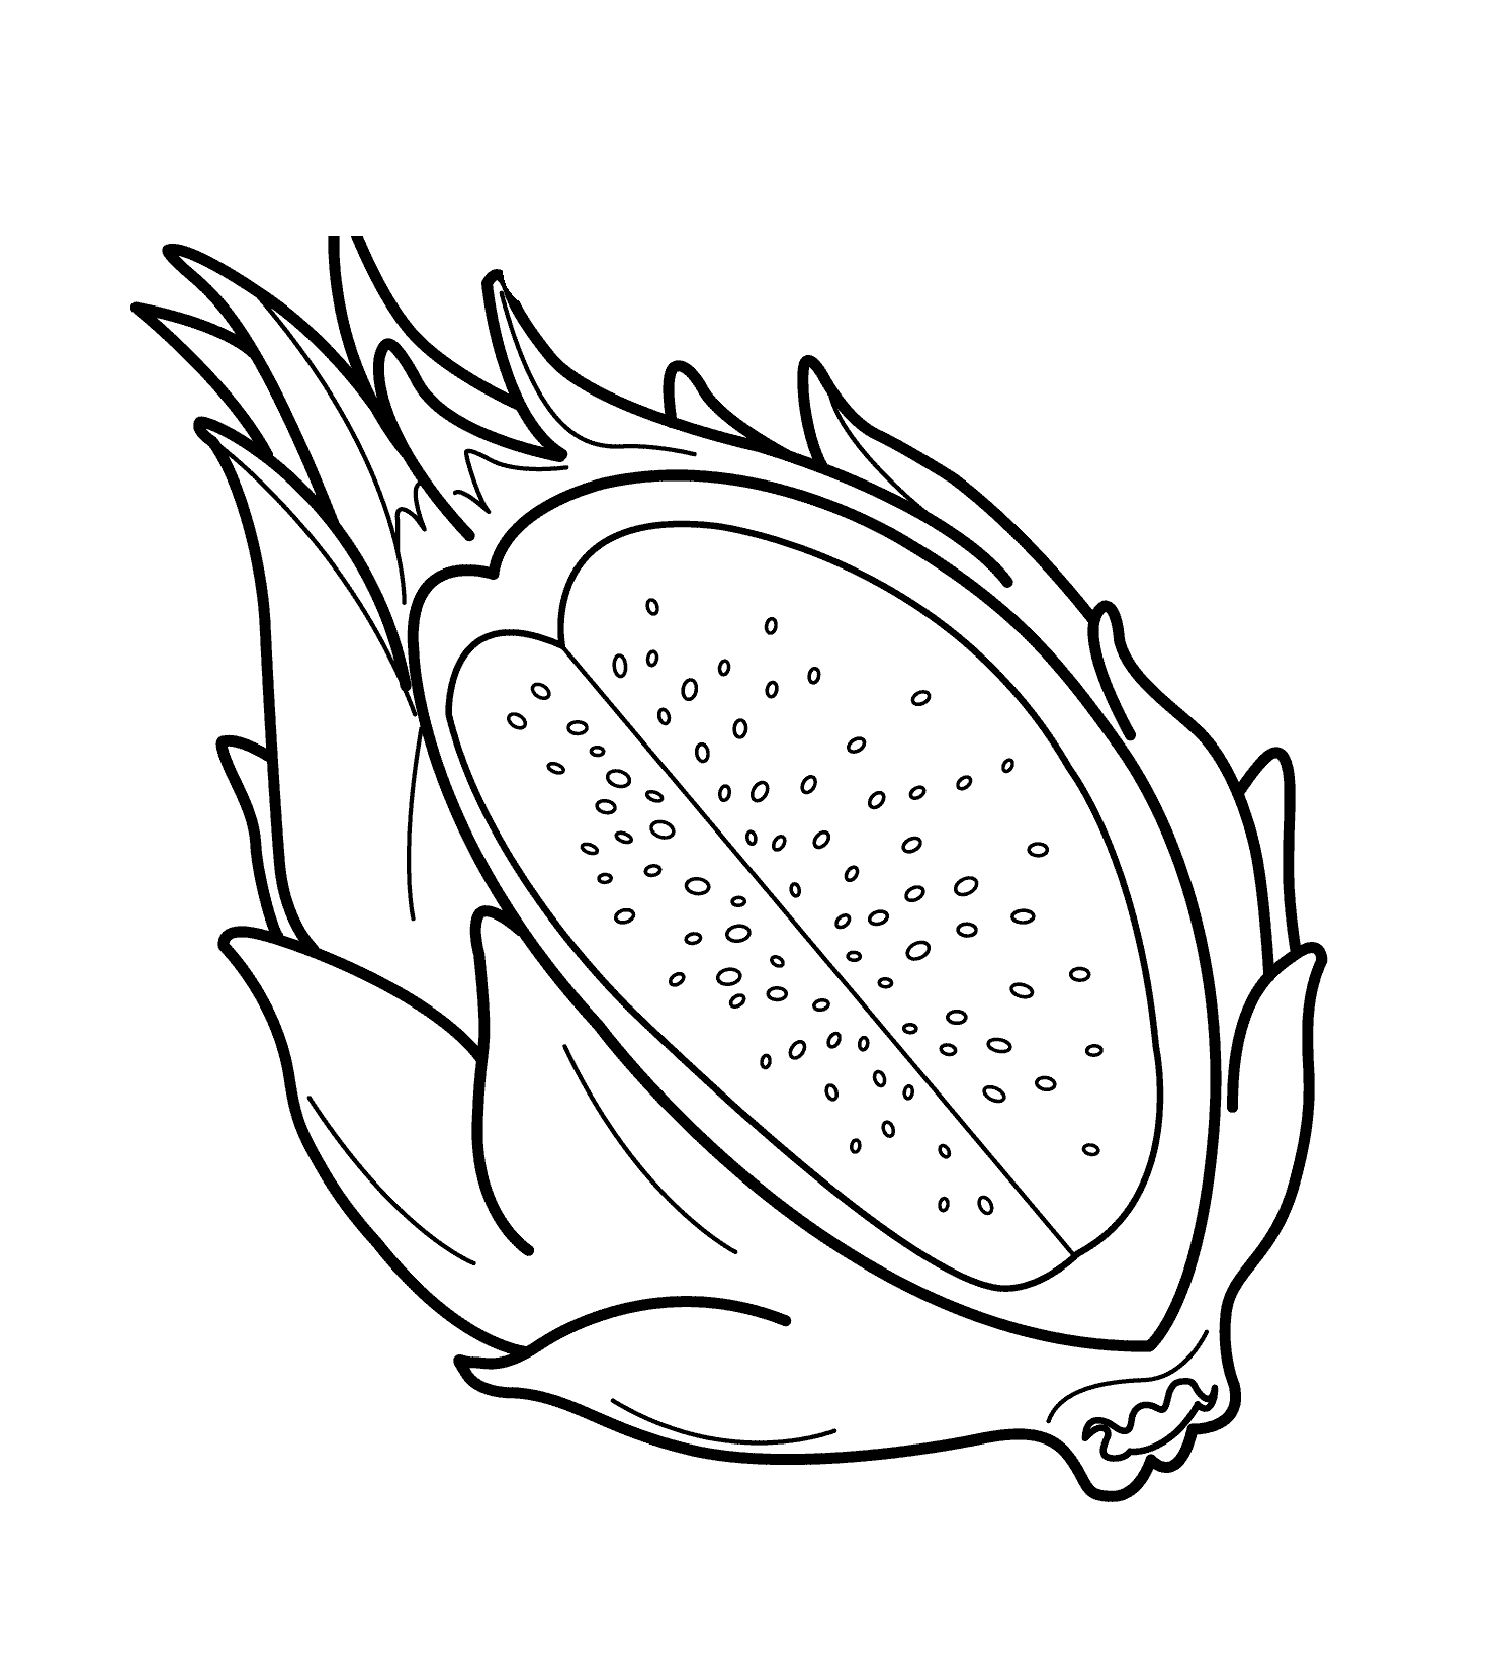 Dragon Fruit 2 Coloring Page - Free Printable Coloring Pages for Kids